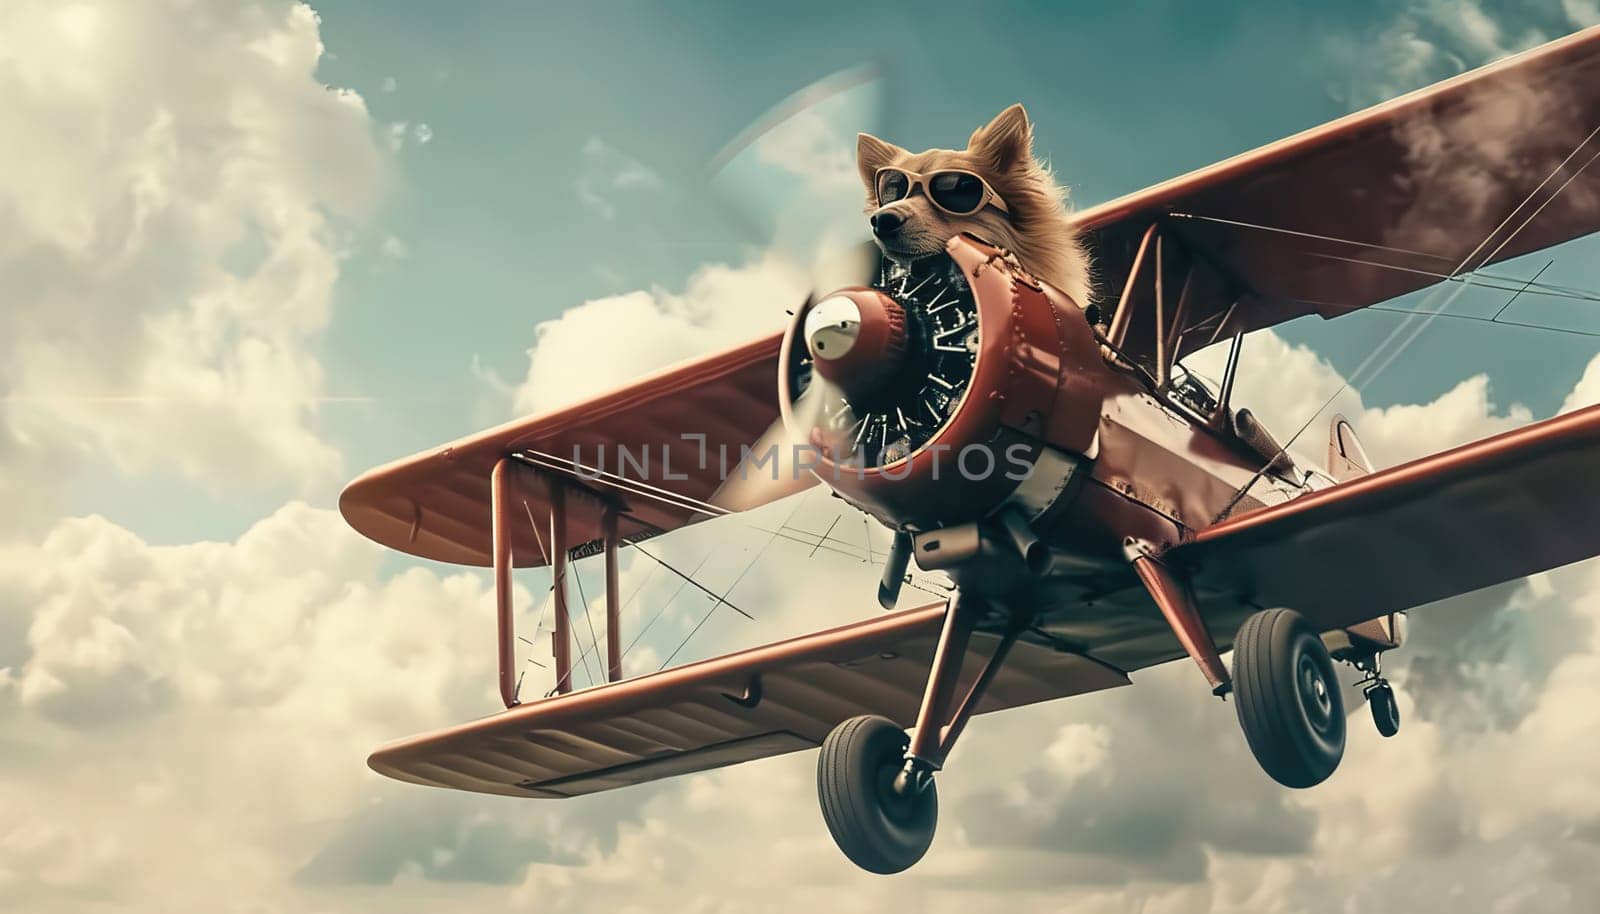 A dog is flying a red airplane with a propeller by AI generated image.